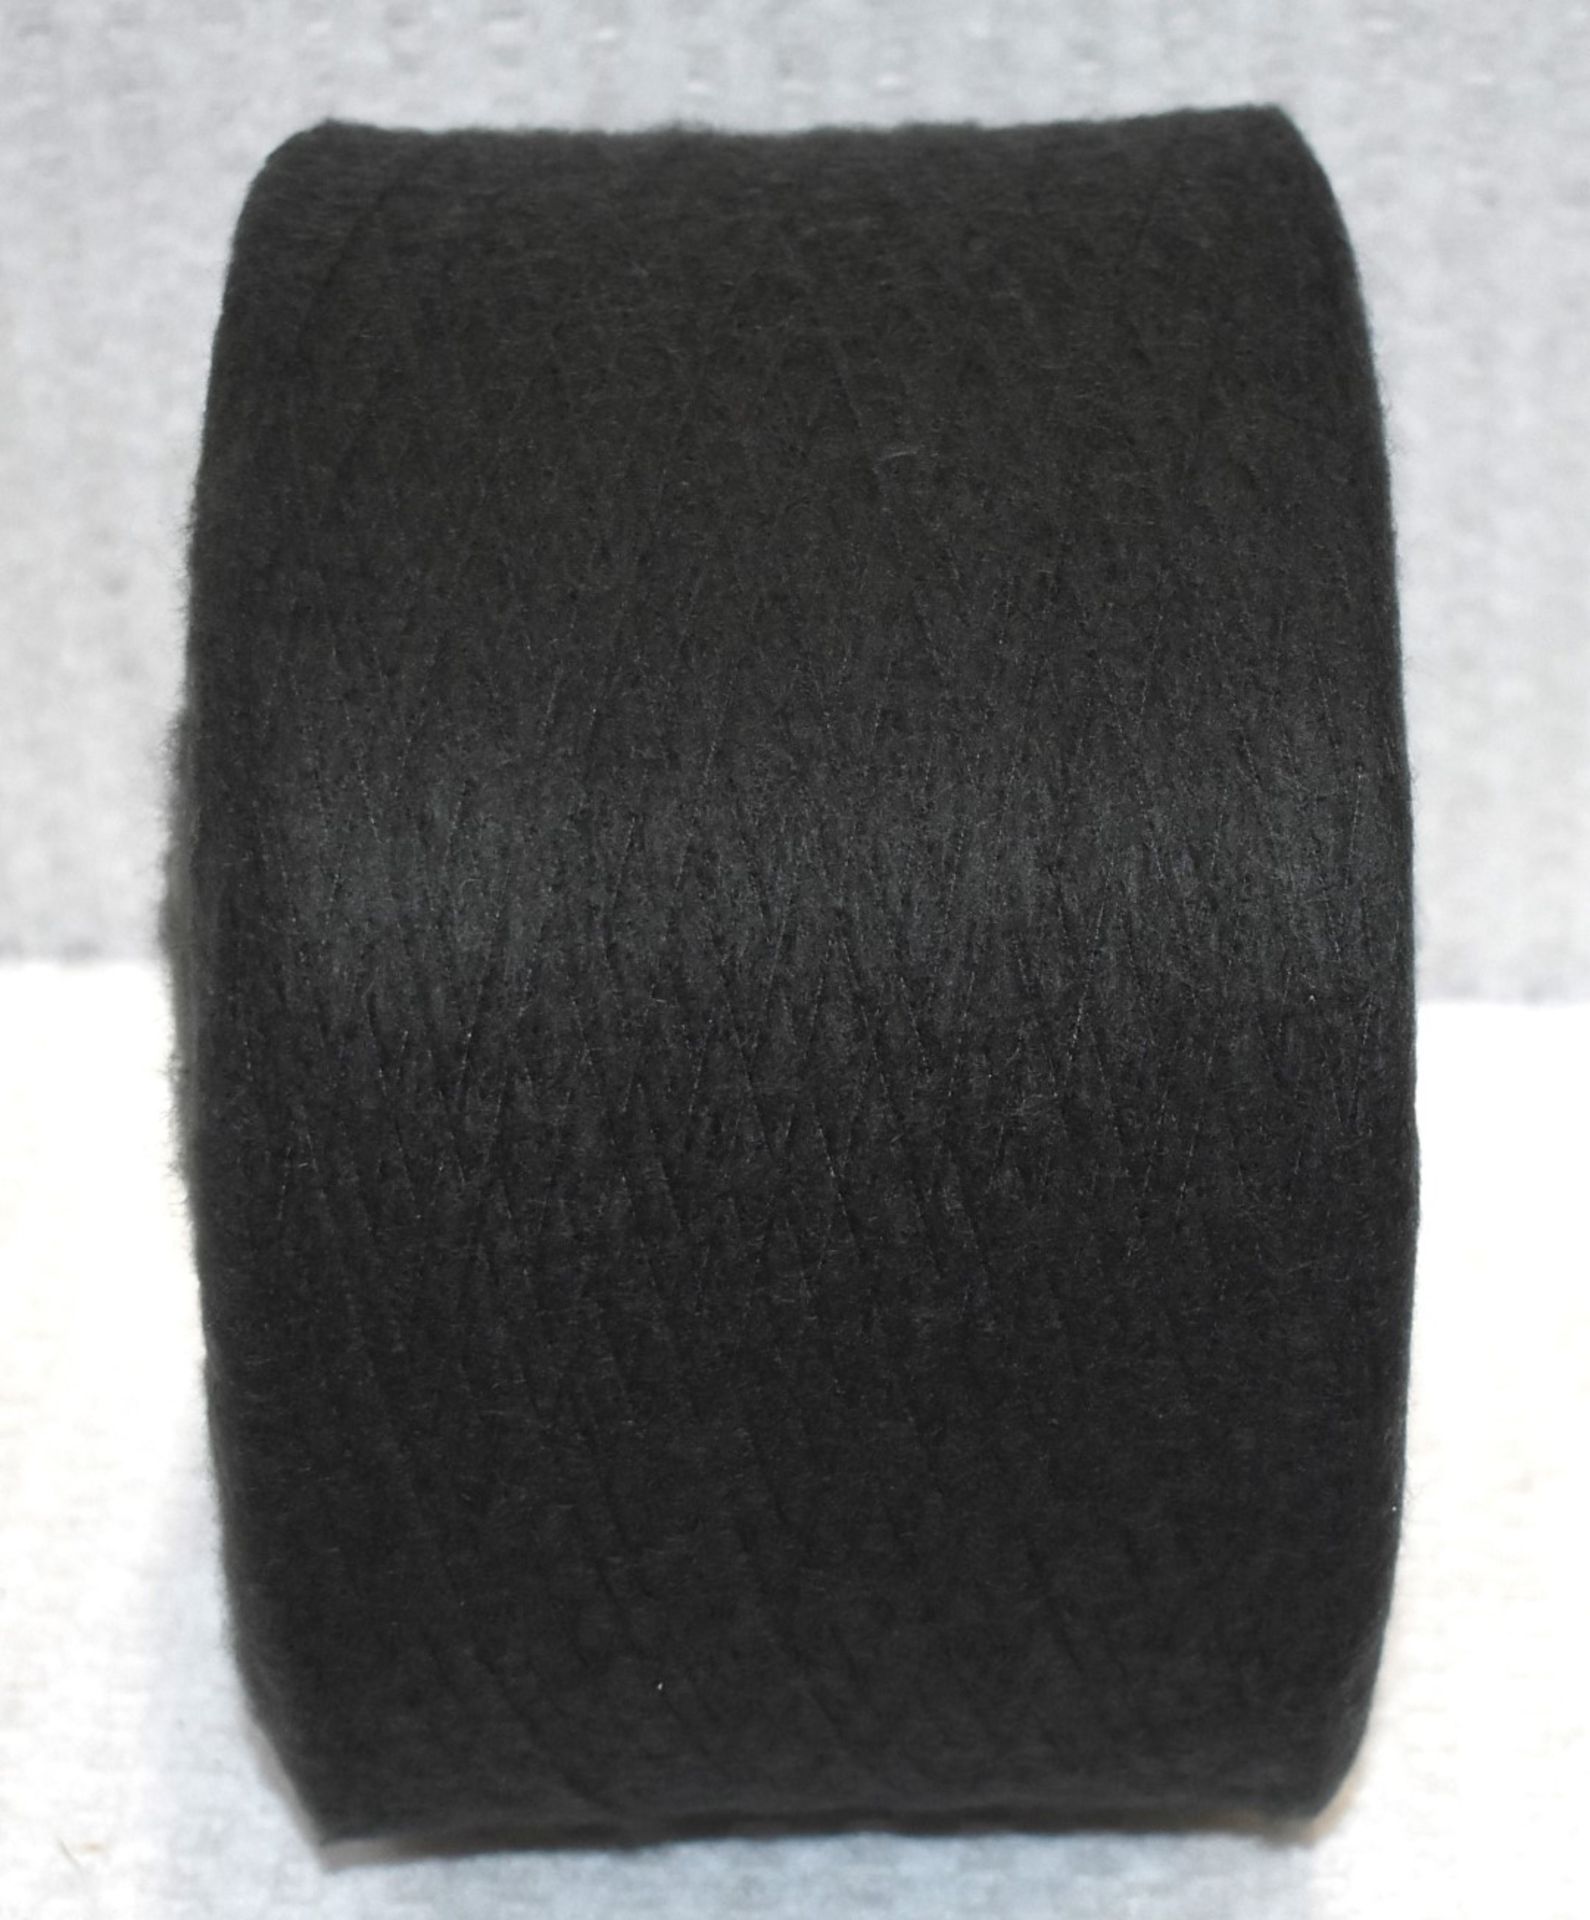 1 x Cone of 1/7,5 Lagona Knitting Yarn - Charcoal - Approx Weight: 2,300g - New Stock ABL Yarn - Image 8 of 10